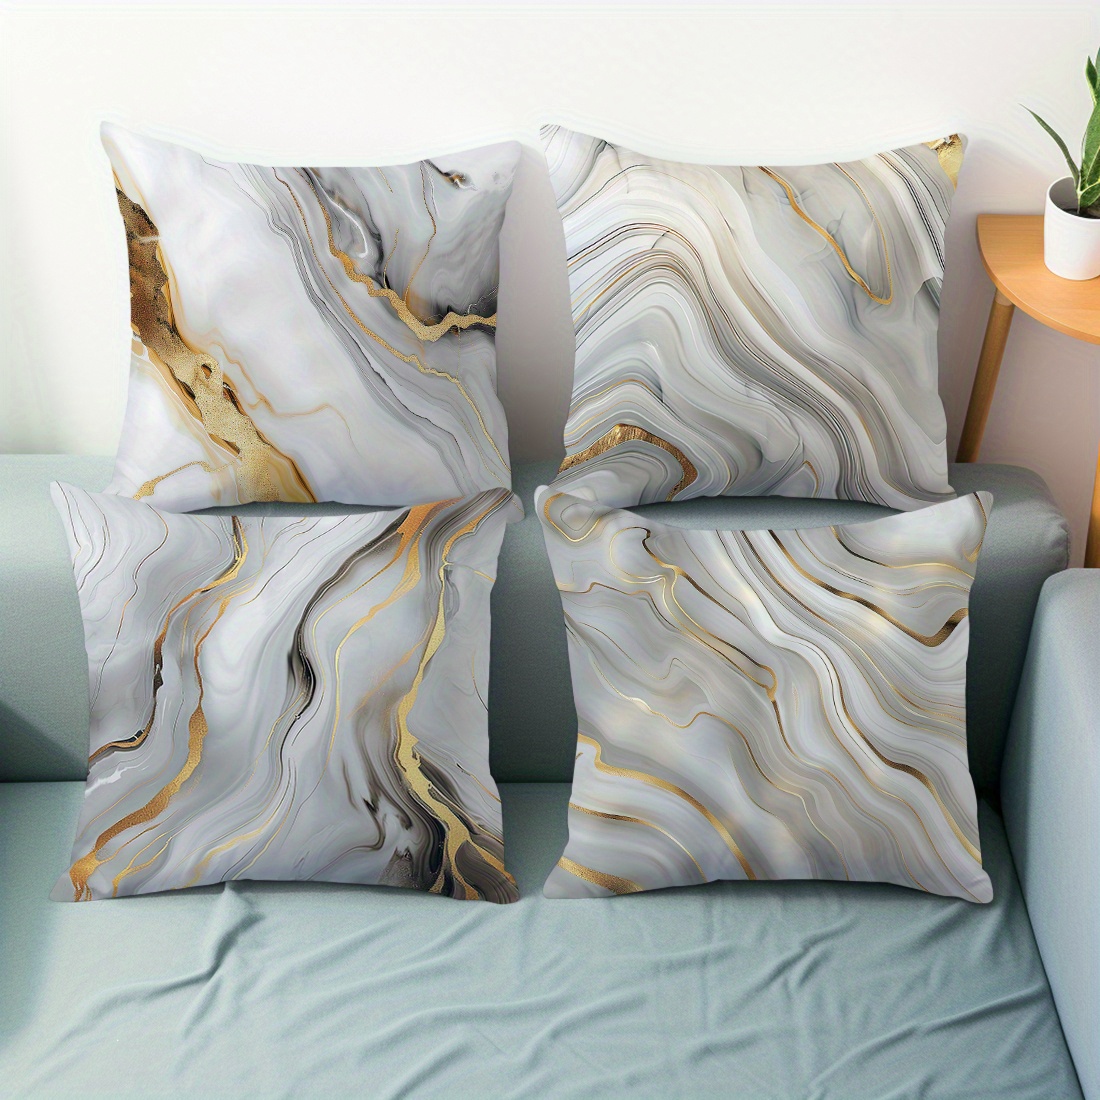 

4-pack Contemporary Grey And Gold Marble Pattern Throw Pillow Covers, Peach Skin Velvet Sofa Cushion Cases, 45x45cm Zippered Polyester Decorative Pillowcases For Various Room Types, Machine Washable